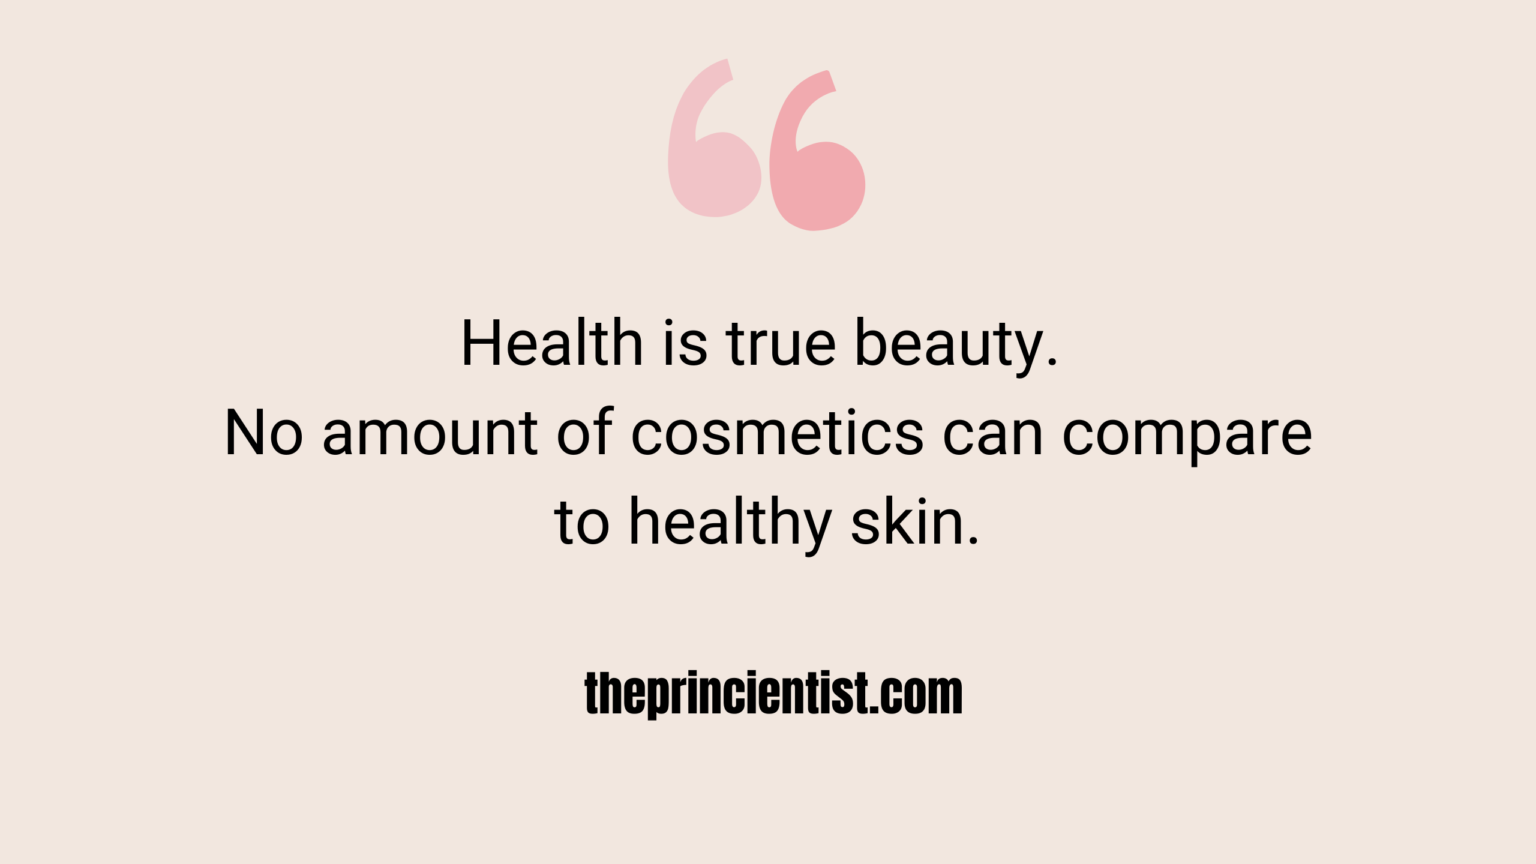 quote: Health is true beauty. No amount of cosmetics can compare to healthy skin.